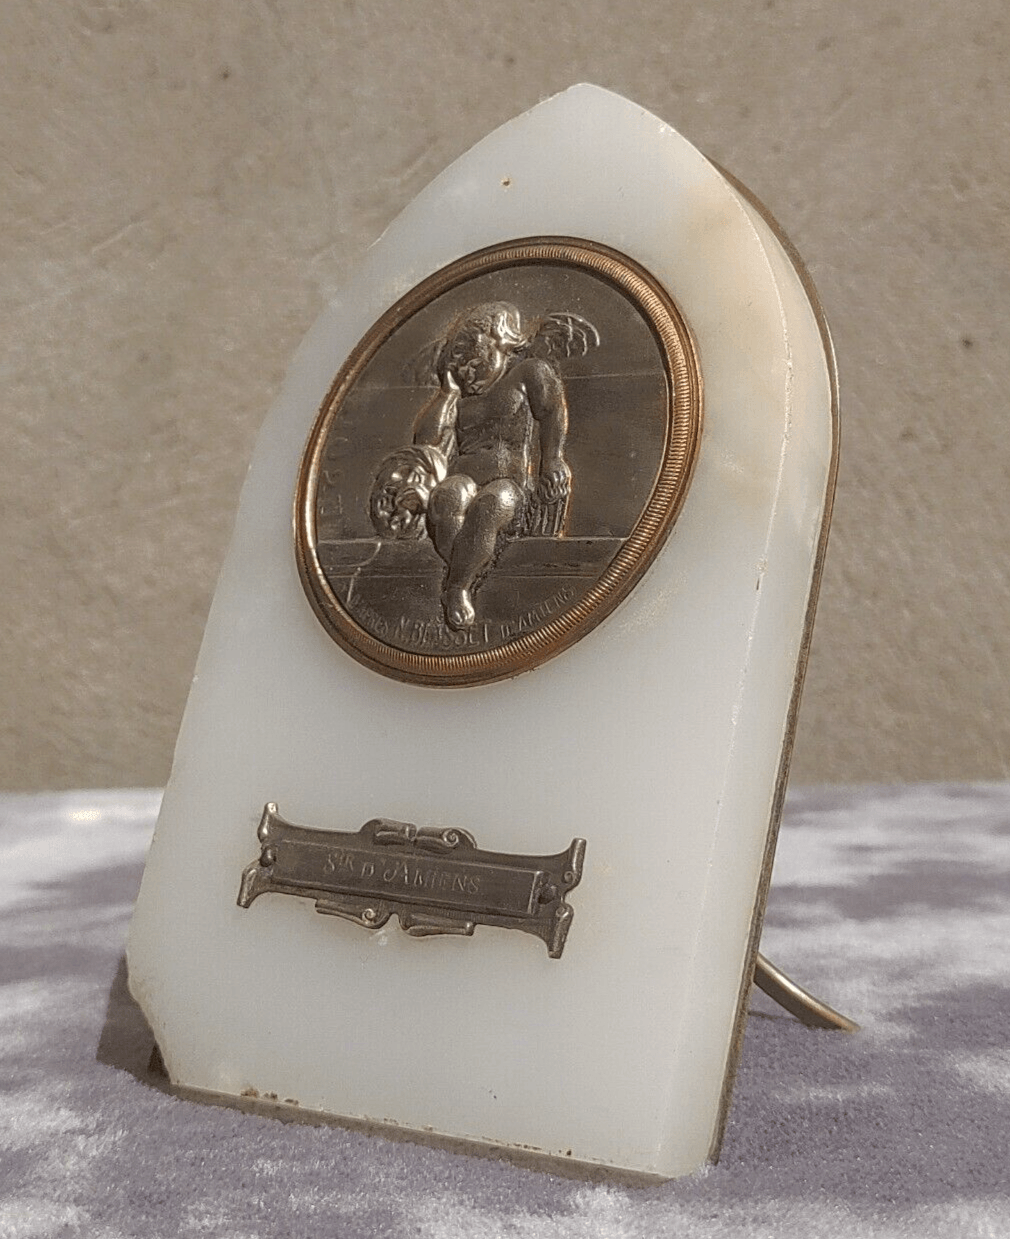 Antique French Marble Display Plaque Weeping Angel of Amiens WW1 Memento Souvenir - Tommy's Treasure